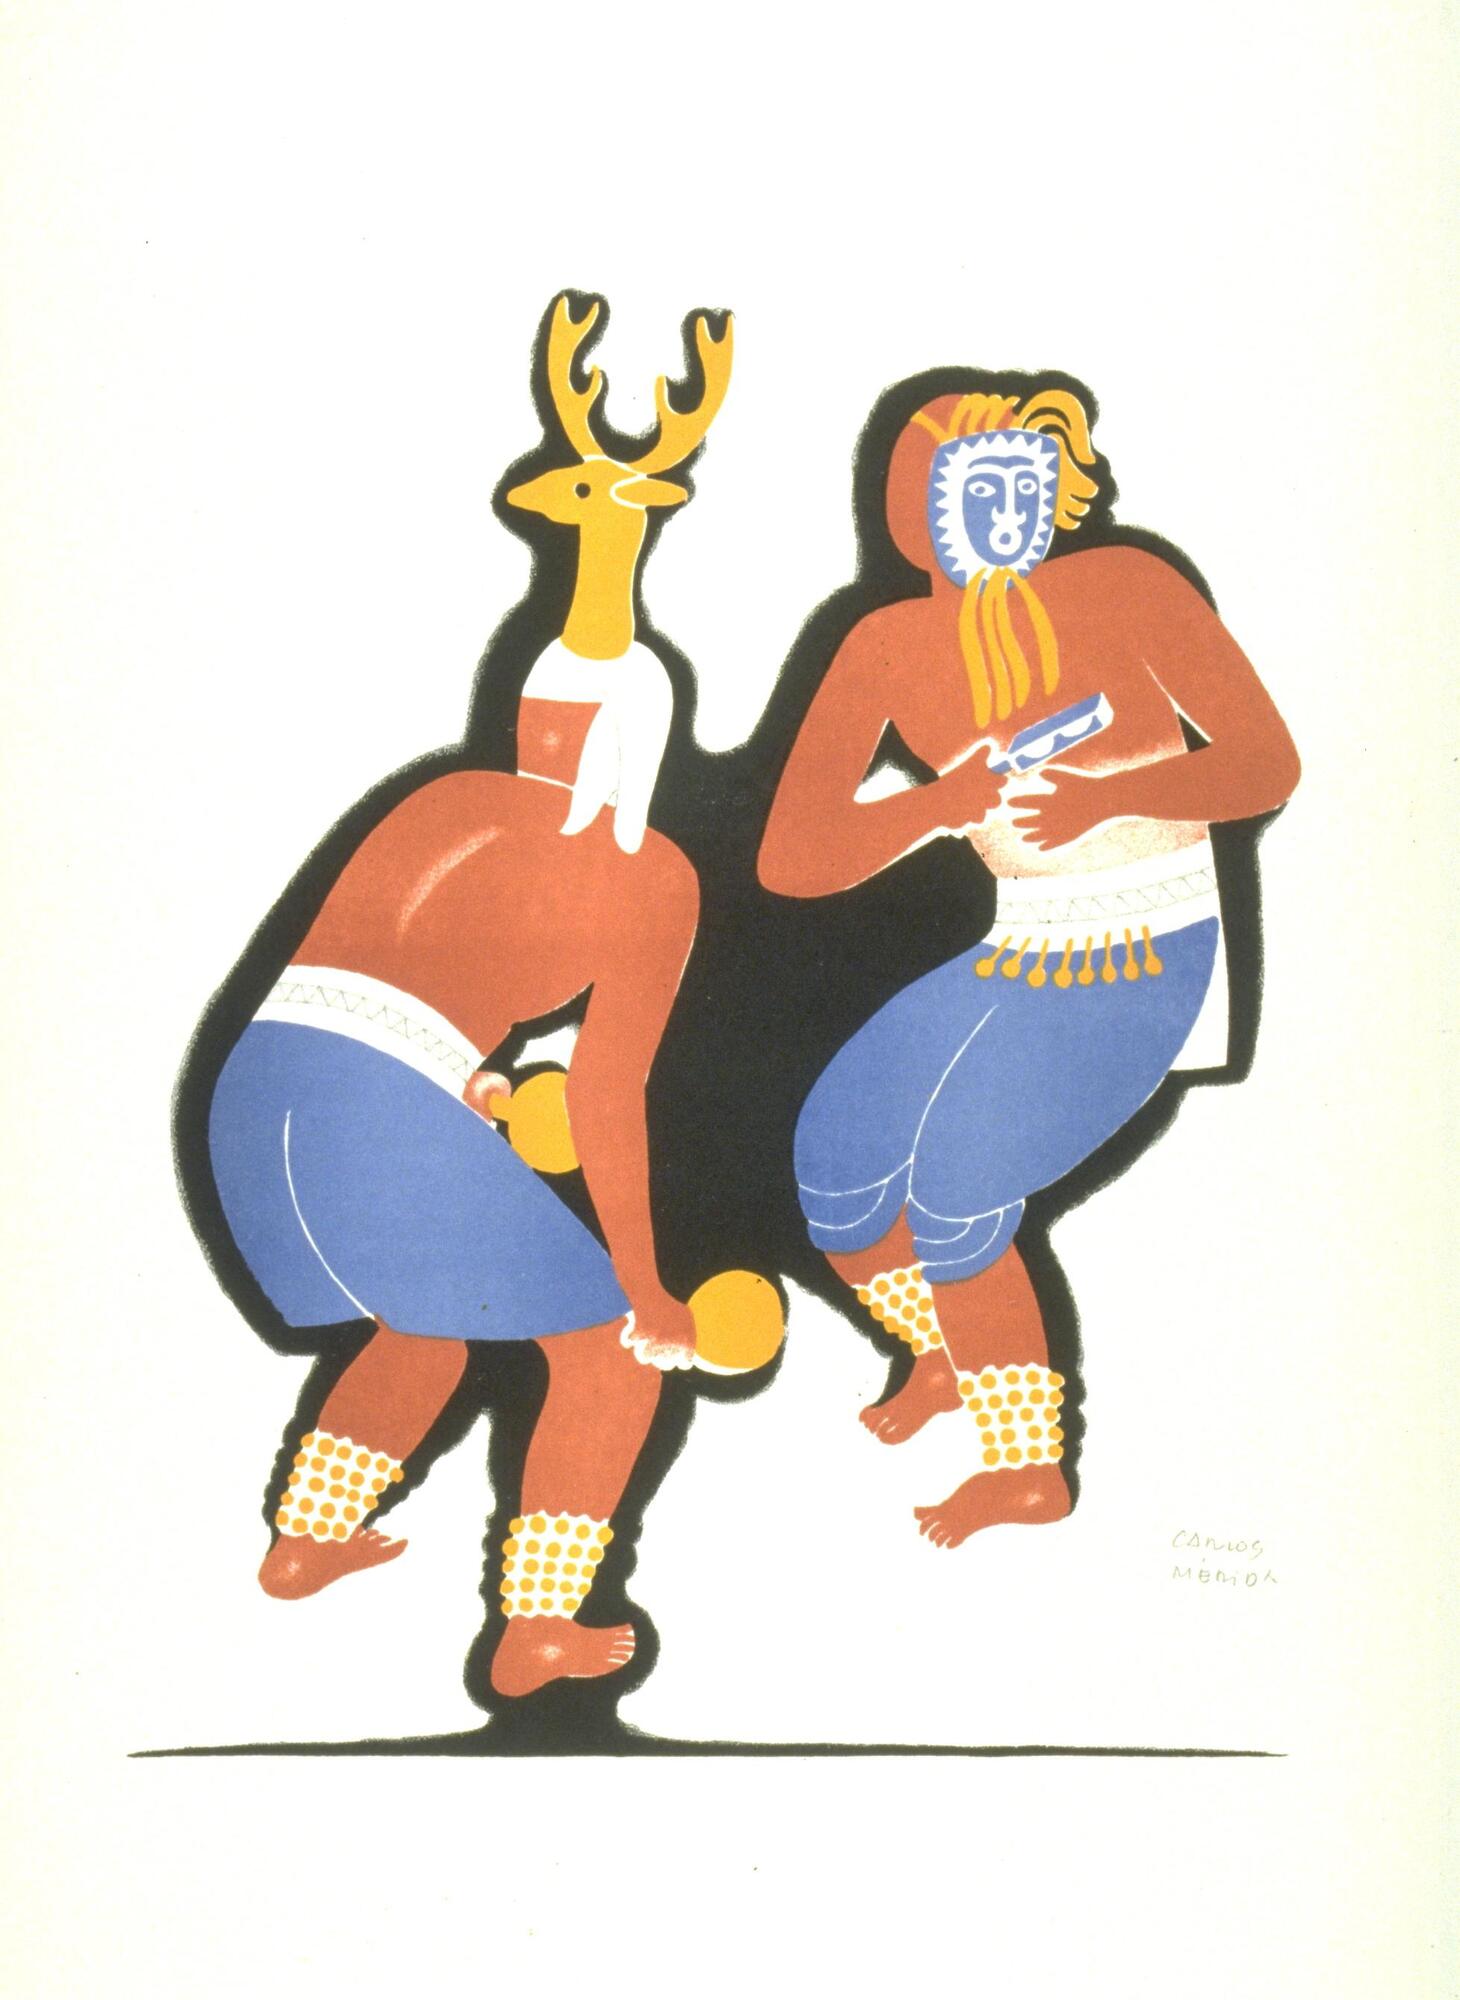 Centered on the page in this print are two figures. Both have oranged-tan skin, revealed by their bare chests, arms and legs. At their ankles, there are white bands with gold circles. On the left, the figure wears blue shorts with a wide white waistband. He faces away, on his head there is a headdress in the shape of a horned-deer that faces to the left, attached by a white cloth. The figure holds two yellow disks. On the right, the man wears slightly different draping knickers with a wide-white waist band that has small orange toggles hanging off the front and a white flap off the back. He wears a blue mask with a white, abstracted face painted on. The mask has gold fabric attached at the top and bottom to represent hair and a beard. This right figure holds a small blue box with white design.